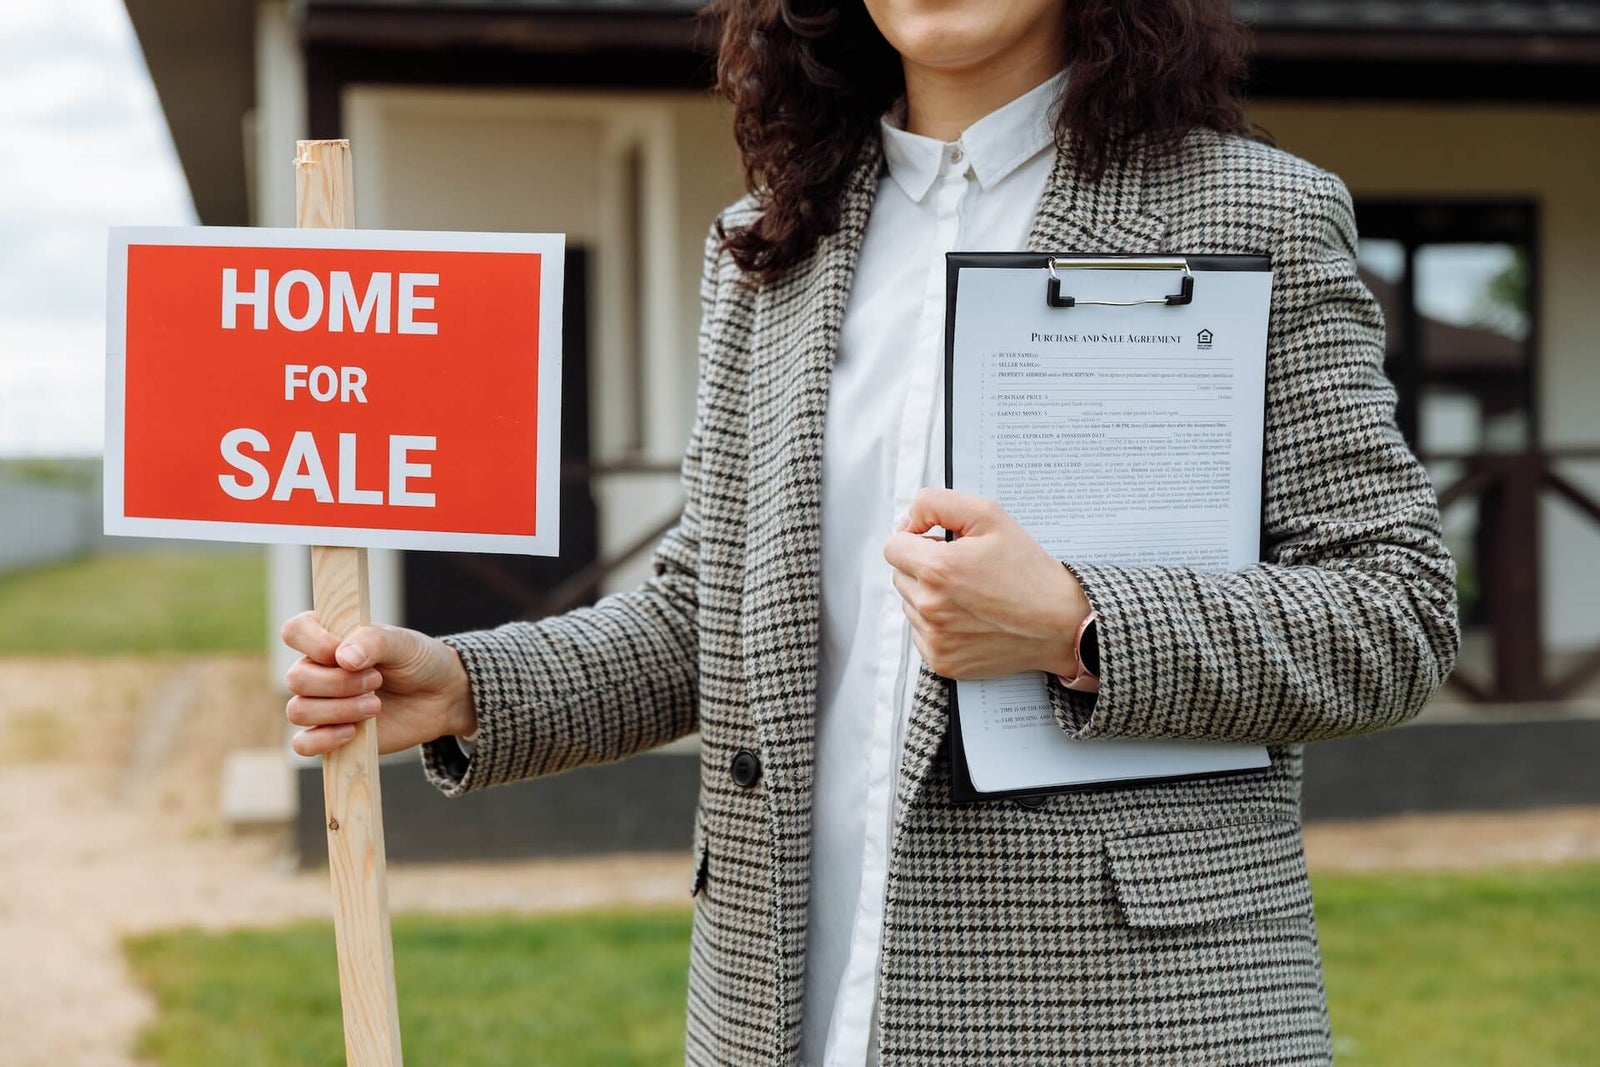 Woman wearing a blazer and holding a red home for sale sign